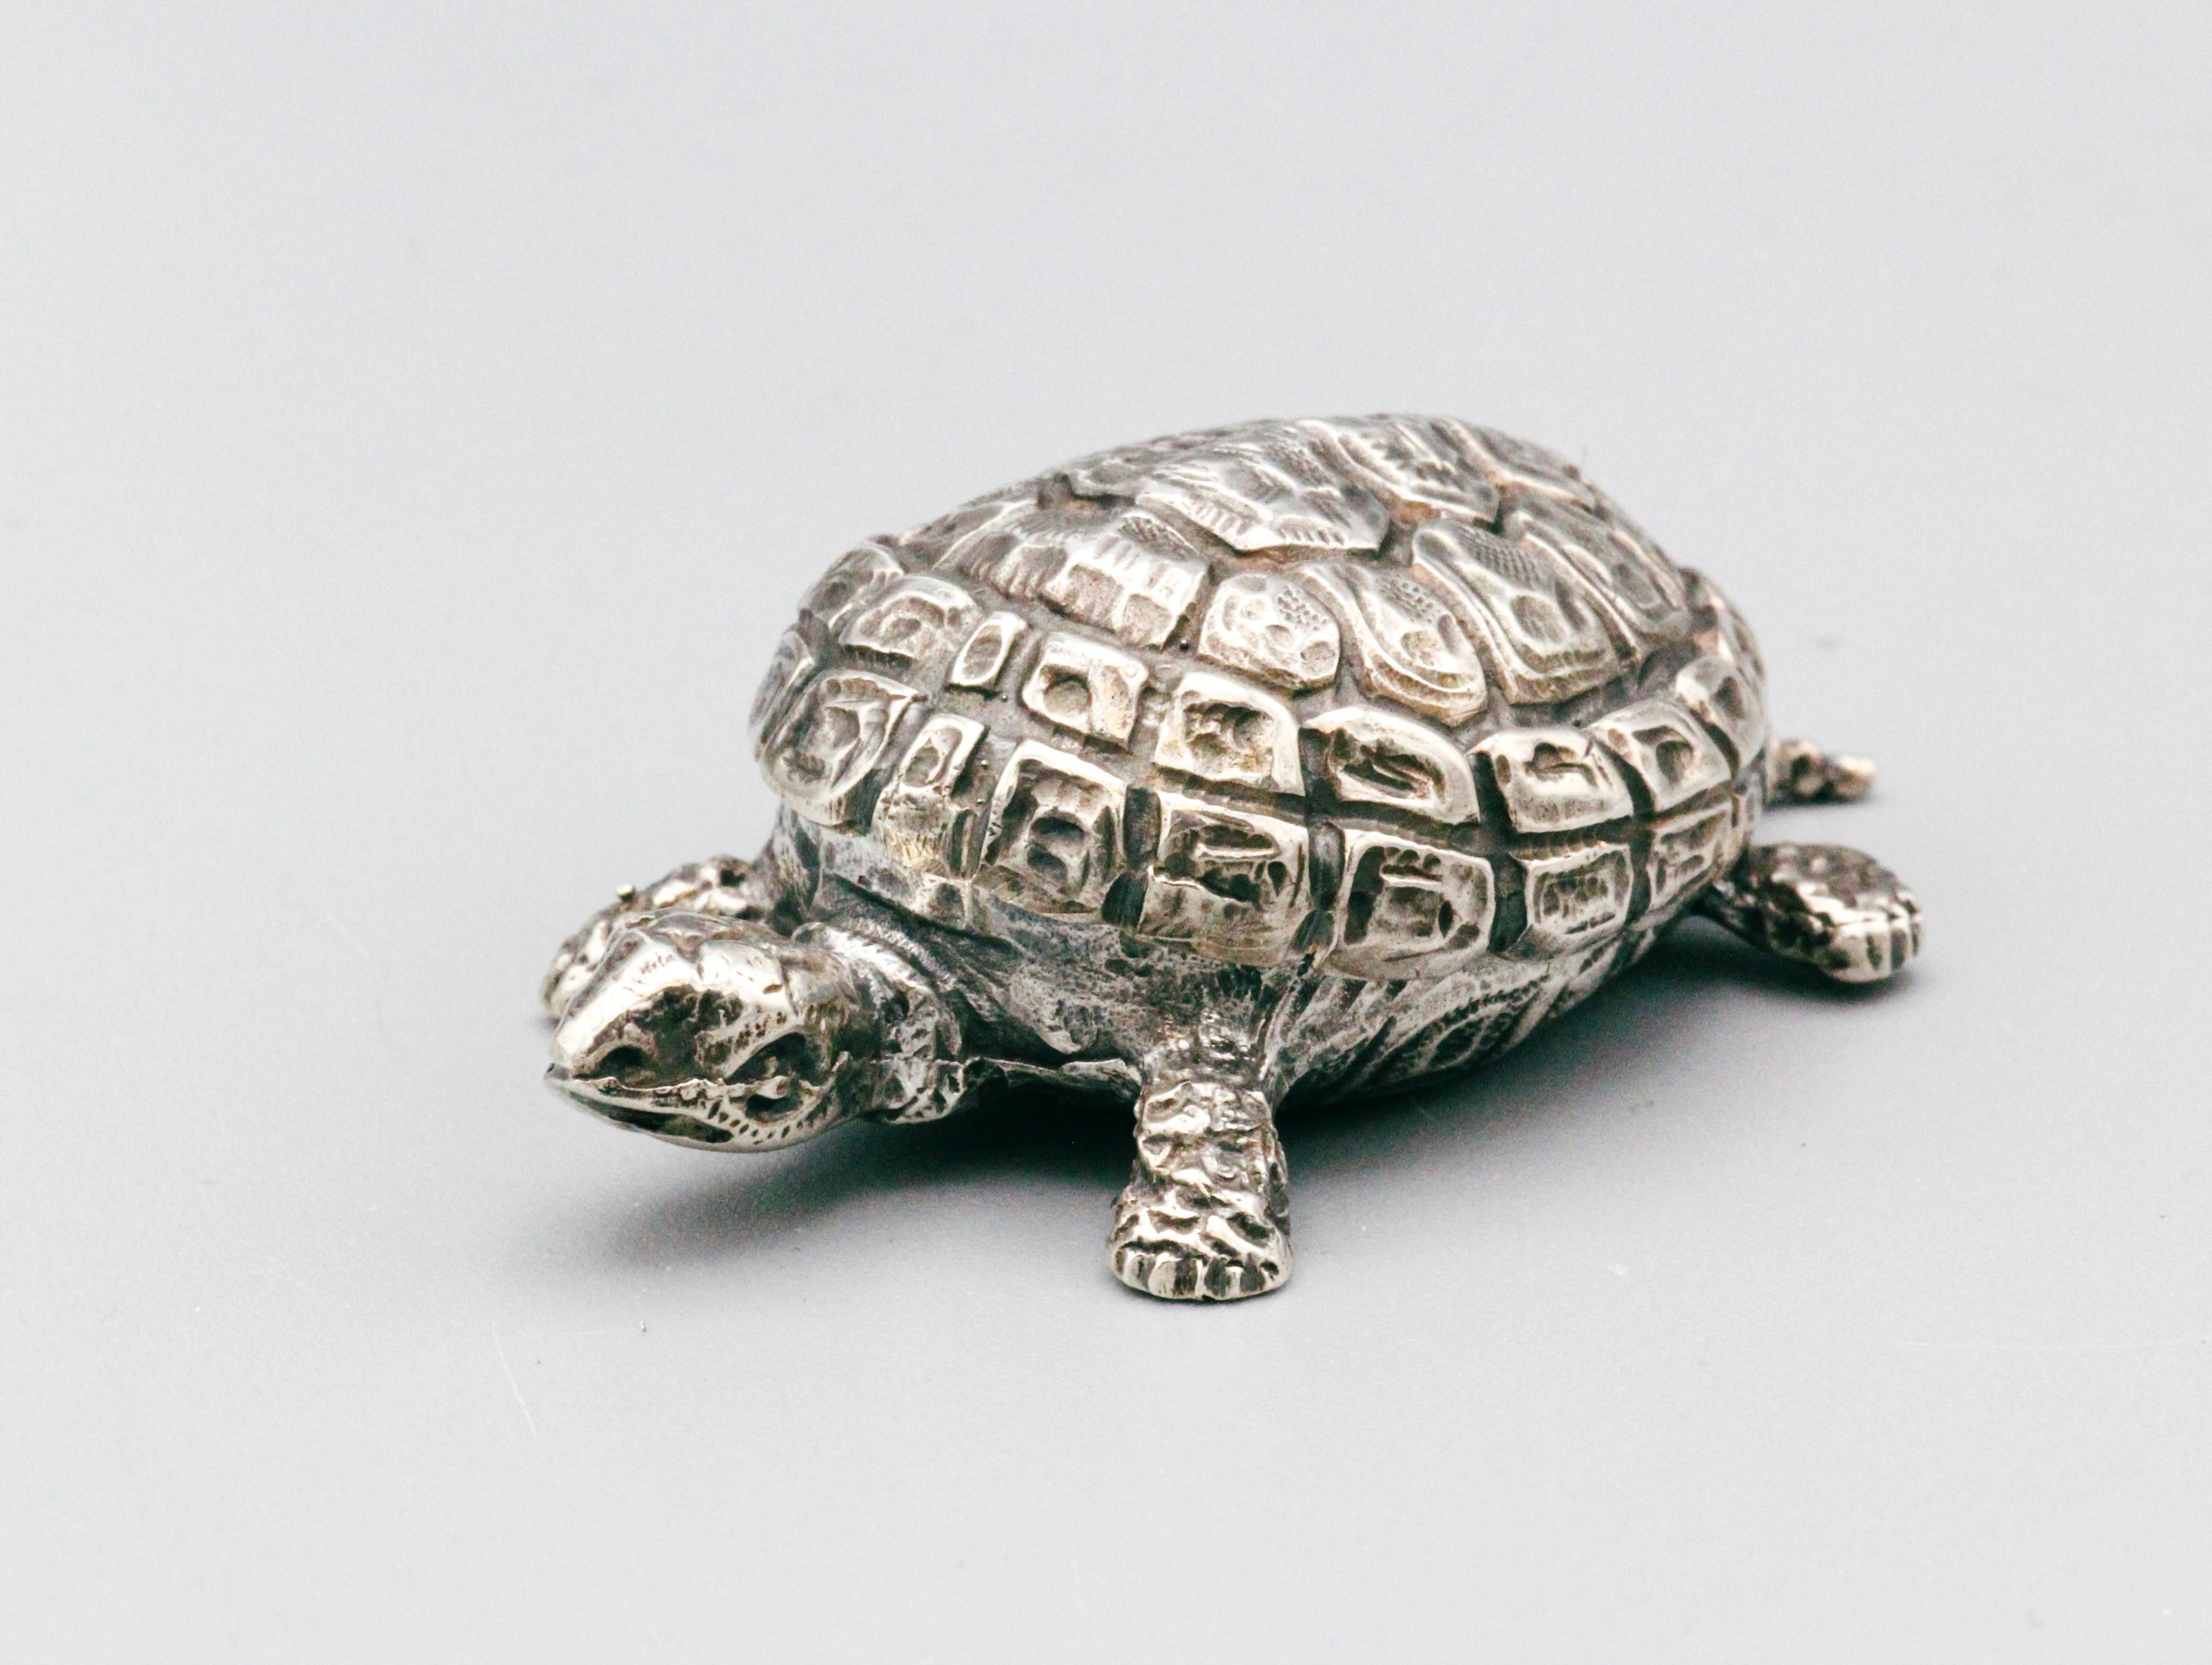 Dive into Luxury: A Buccellati Midcentury Sterling Silver Turtle Pill Box

This charming and captivating midcentury pill box from Italian design powerhouse Buccellati is more than just a place to store your medication, it's a miniature work of art.